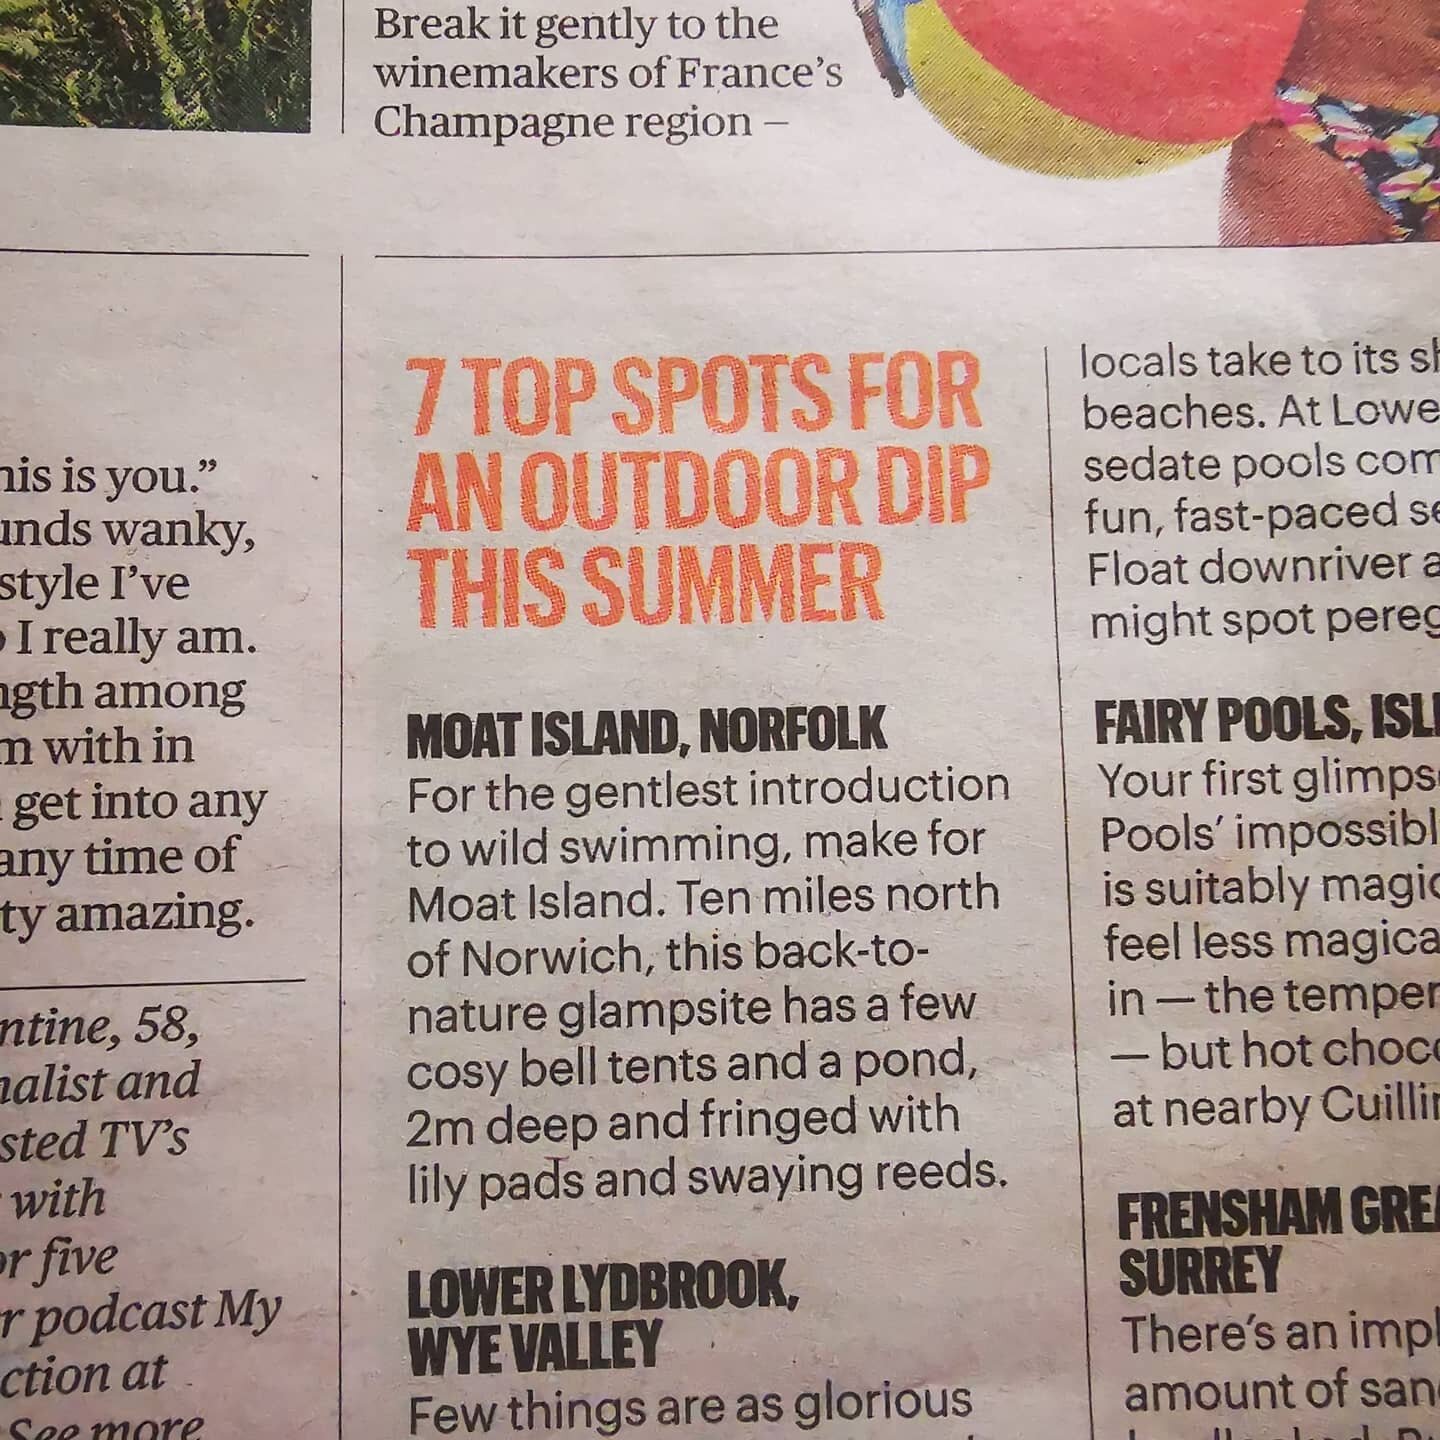 Lovely little mention in the Sunday Times travel section today 😁❤️👍 Thank you very much  @st_travelmag
.
.
.
#wildswimming #glampinguk #staycation #glamping #norfolk #norwich #natural #holiday #swimtime #adventure